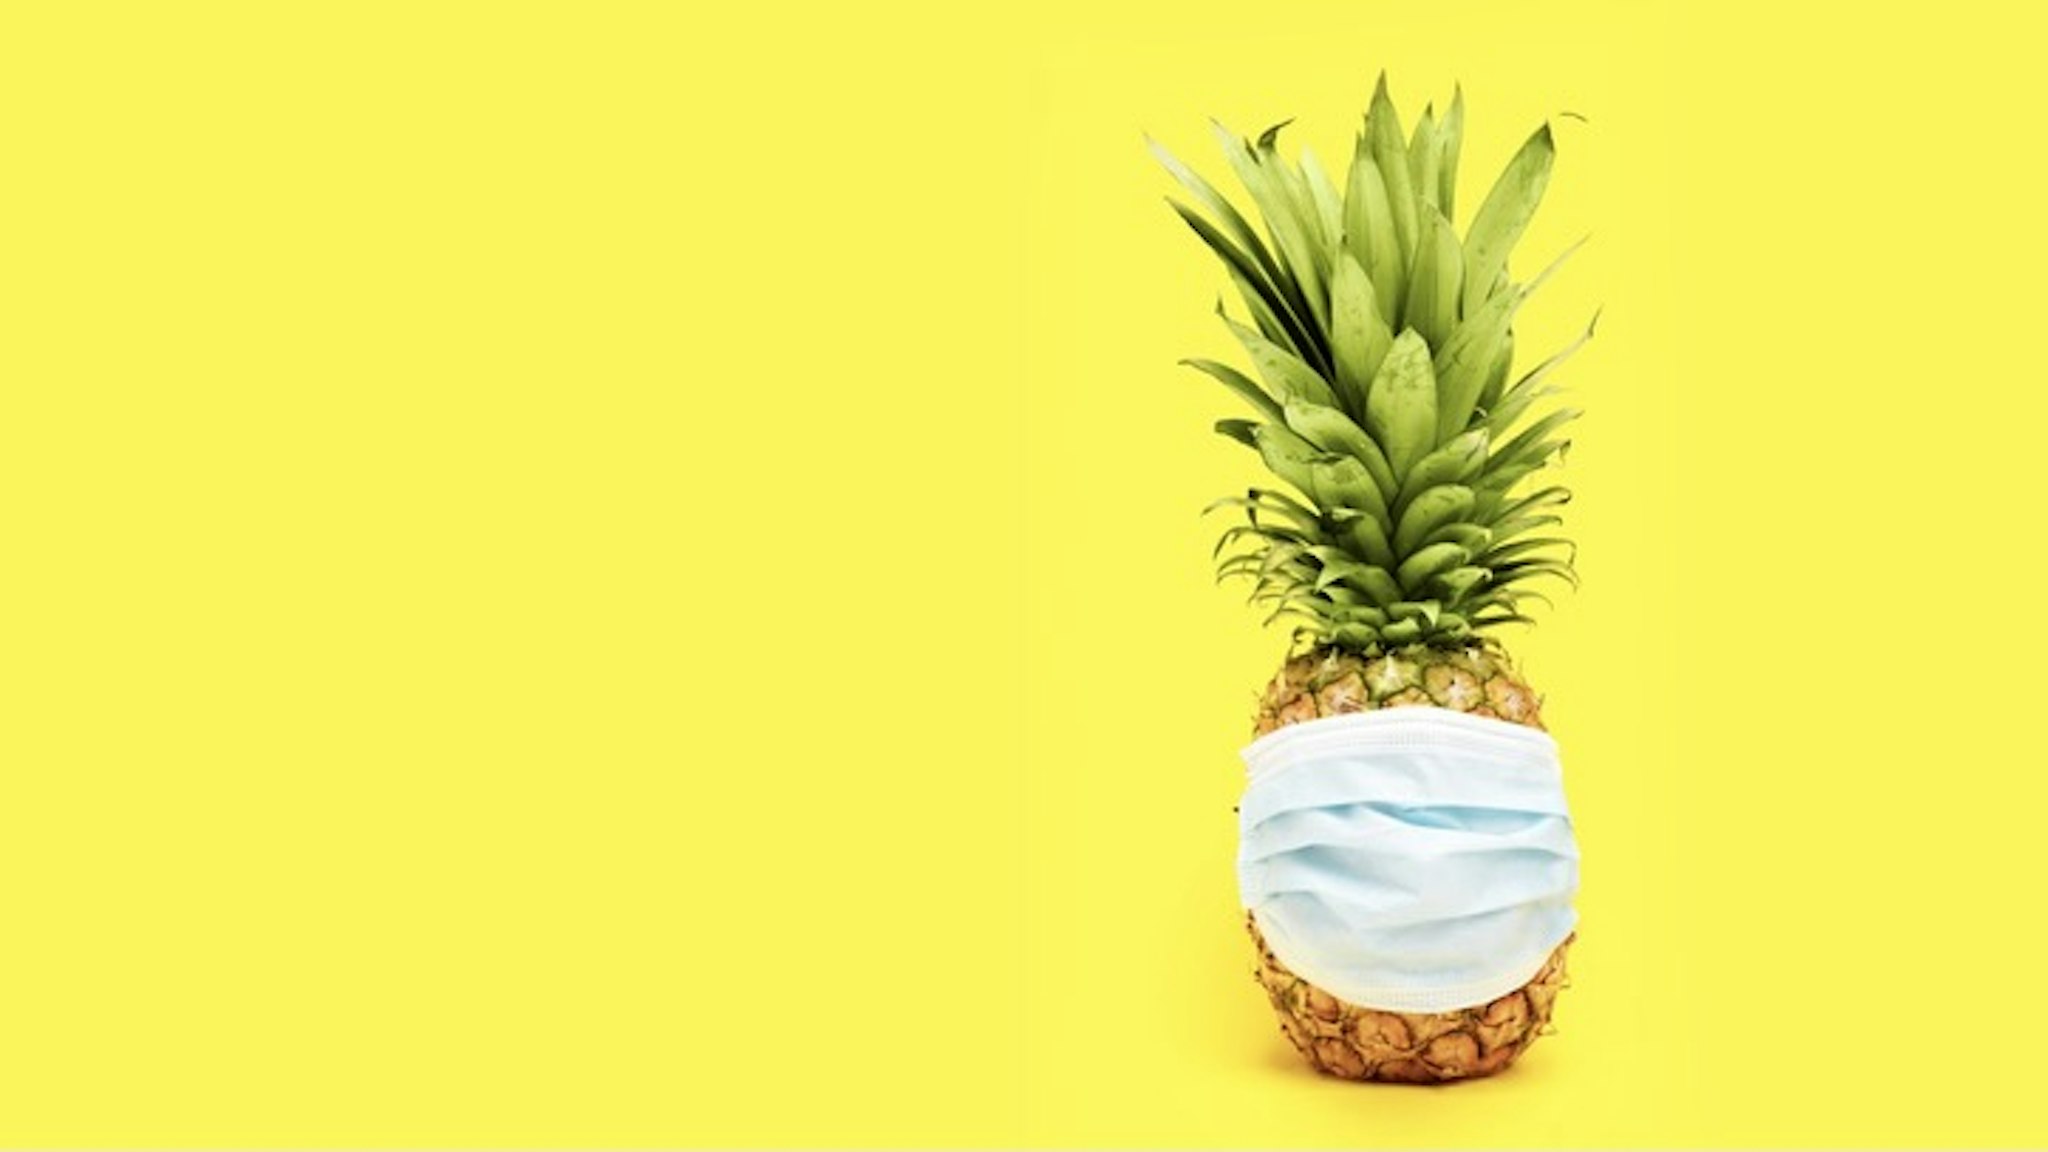 Pineapple with mask on yellow background - stock photo Pineapple with mask on yellow background ENRIQUE MICAELO SANCHEZ via Getty Images